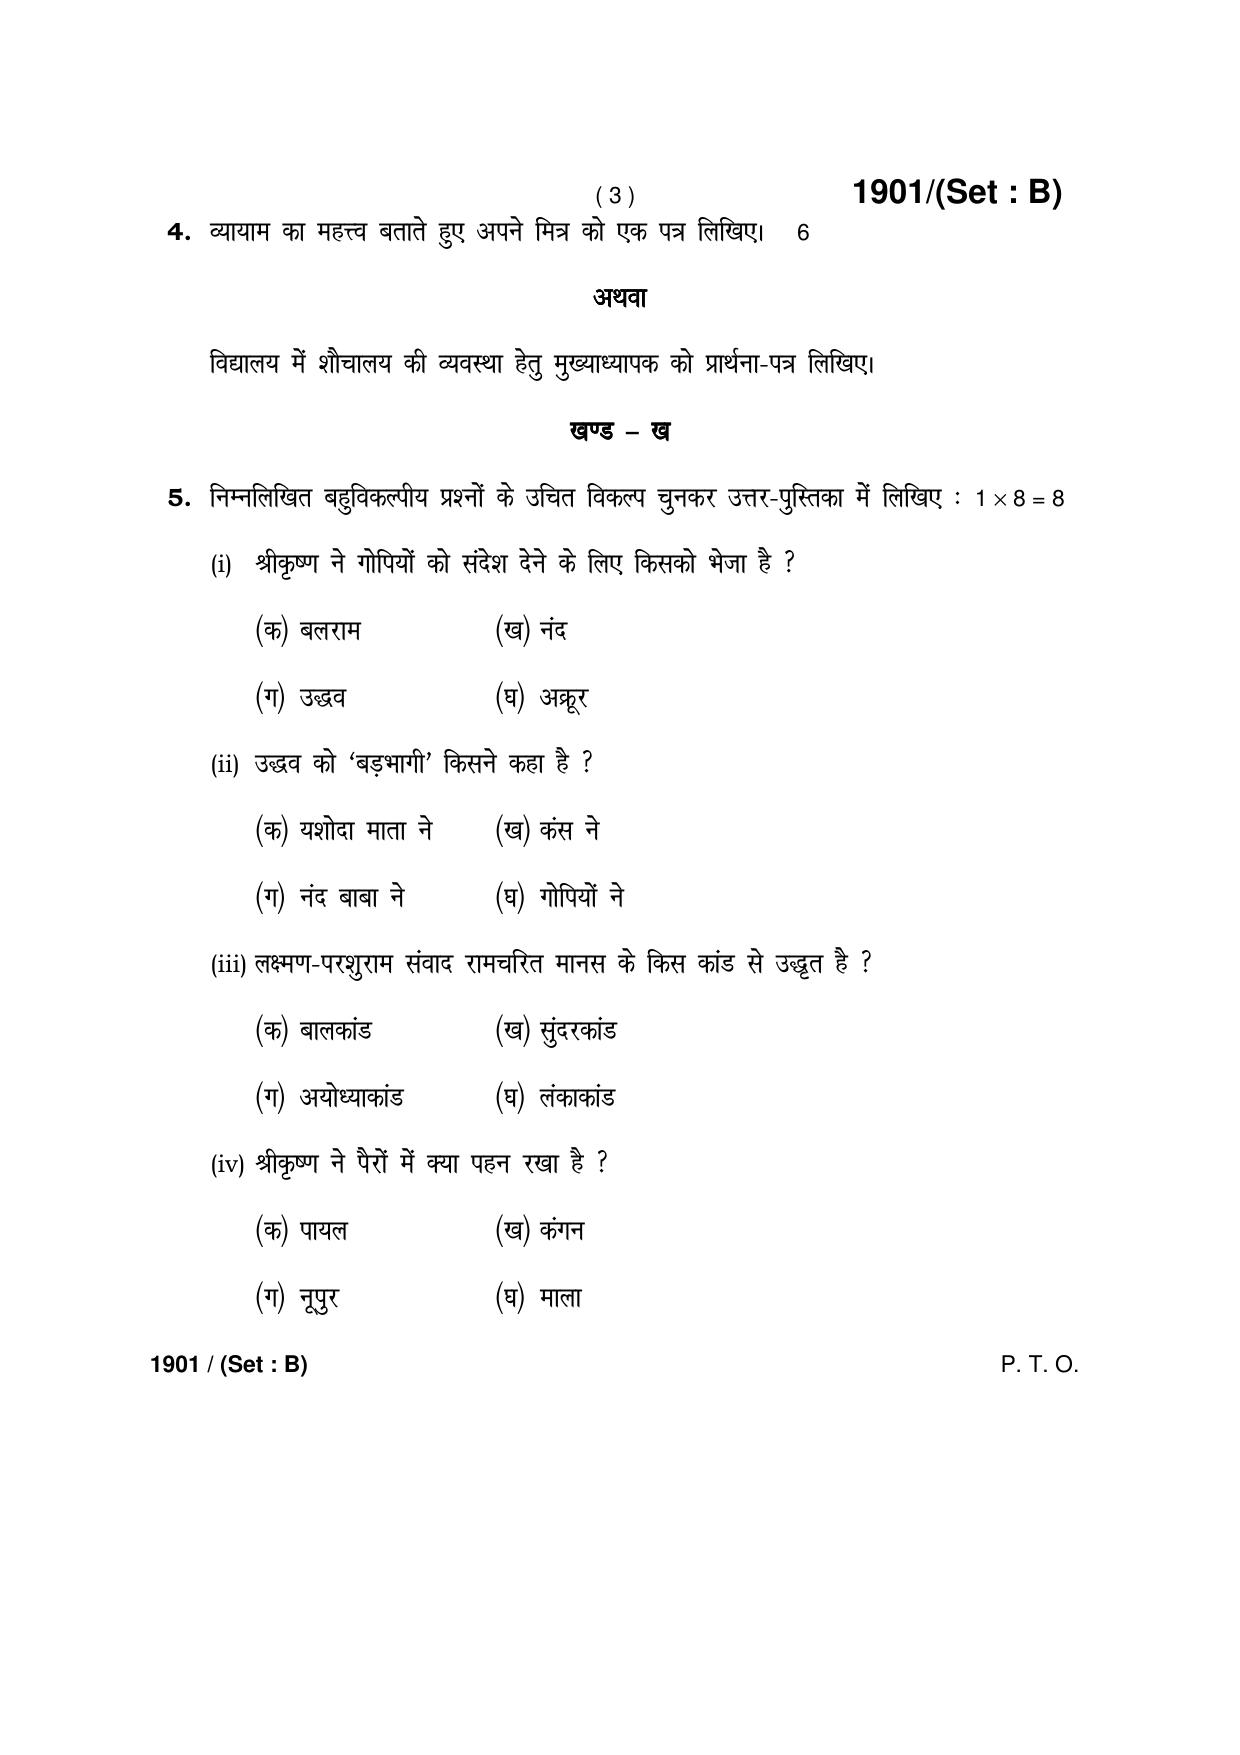 Haryana Board HBSE Class 10 Hindi -B 2017 Question Paper - Page 3